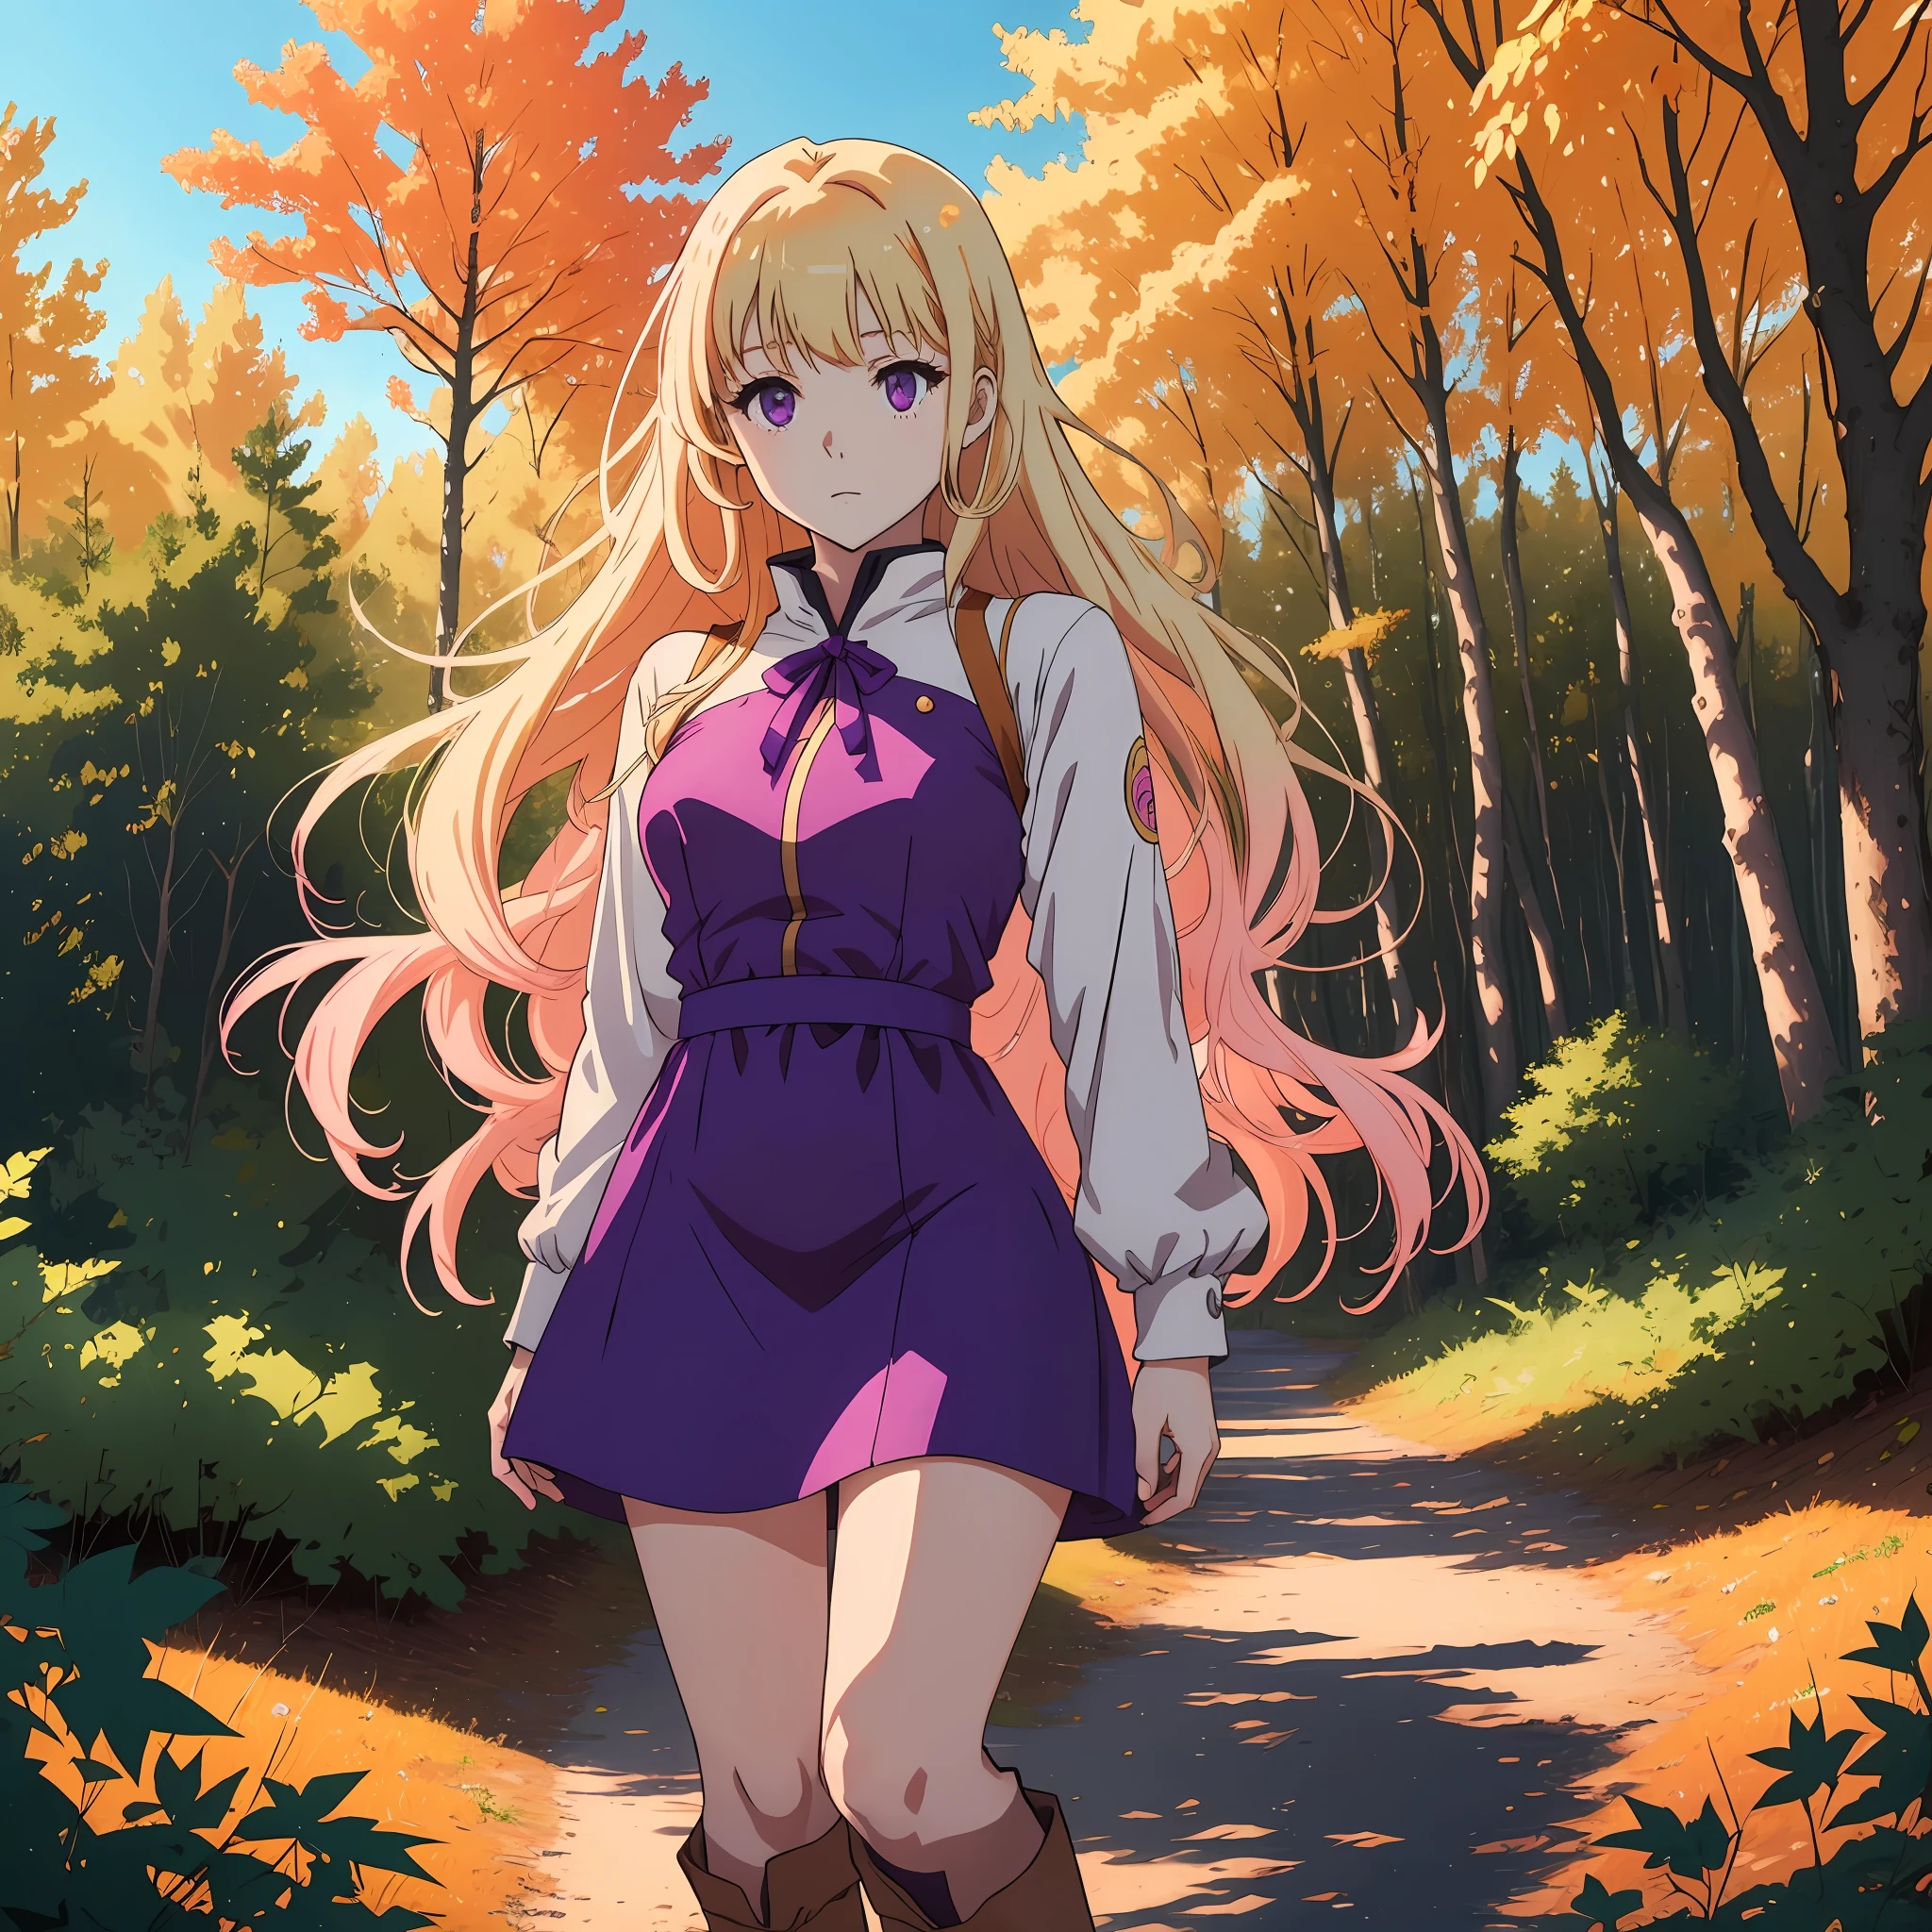 One Light blonde haired 2d anime girl with pale bluish purple eyes wearing gold pink short dress with blank knee length boots in an orange maple leave forest under bright blue sky alone by herself